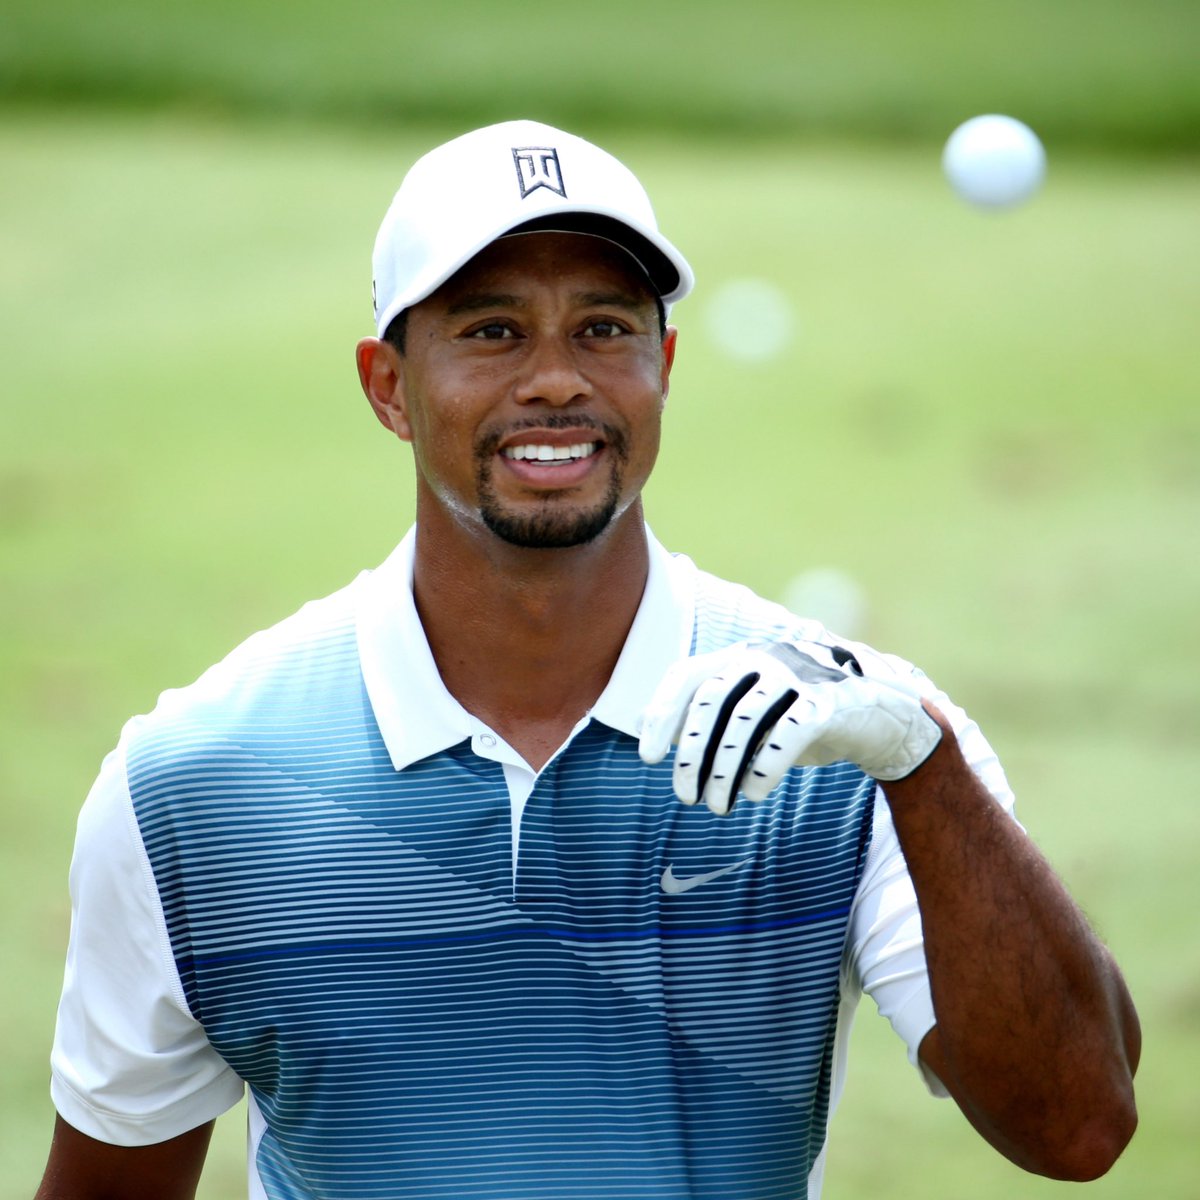 Tiger’s goatee might be a Valhalla thing (Today vs. 2014)